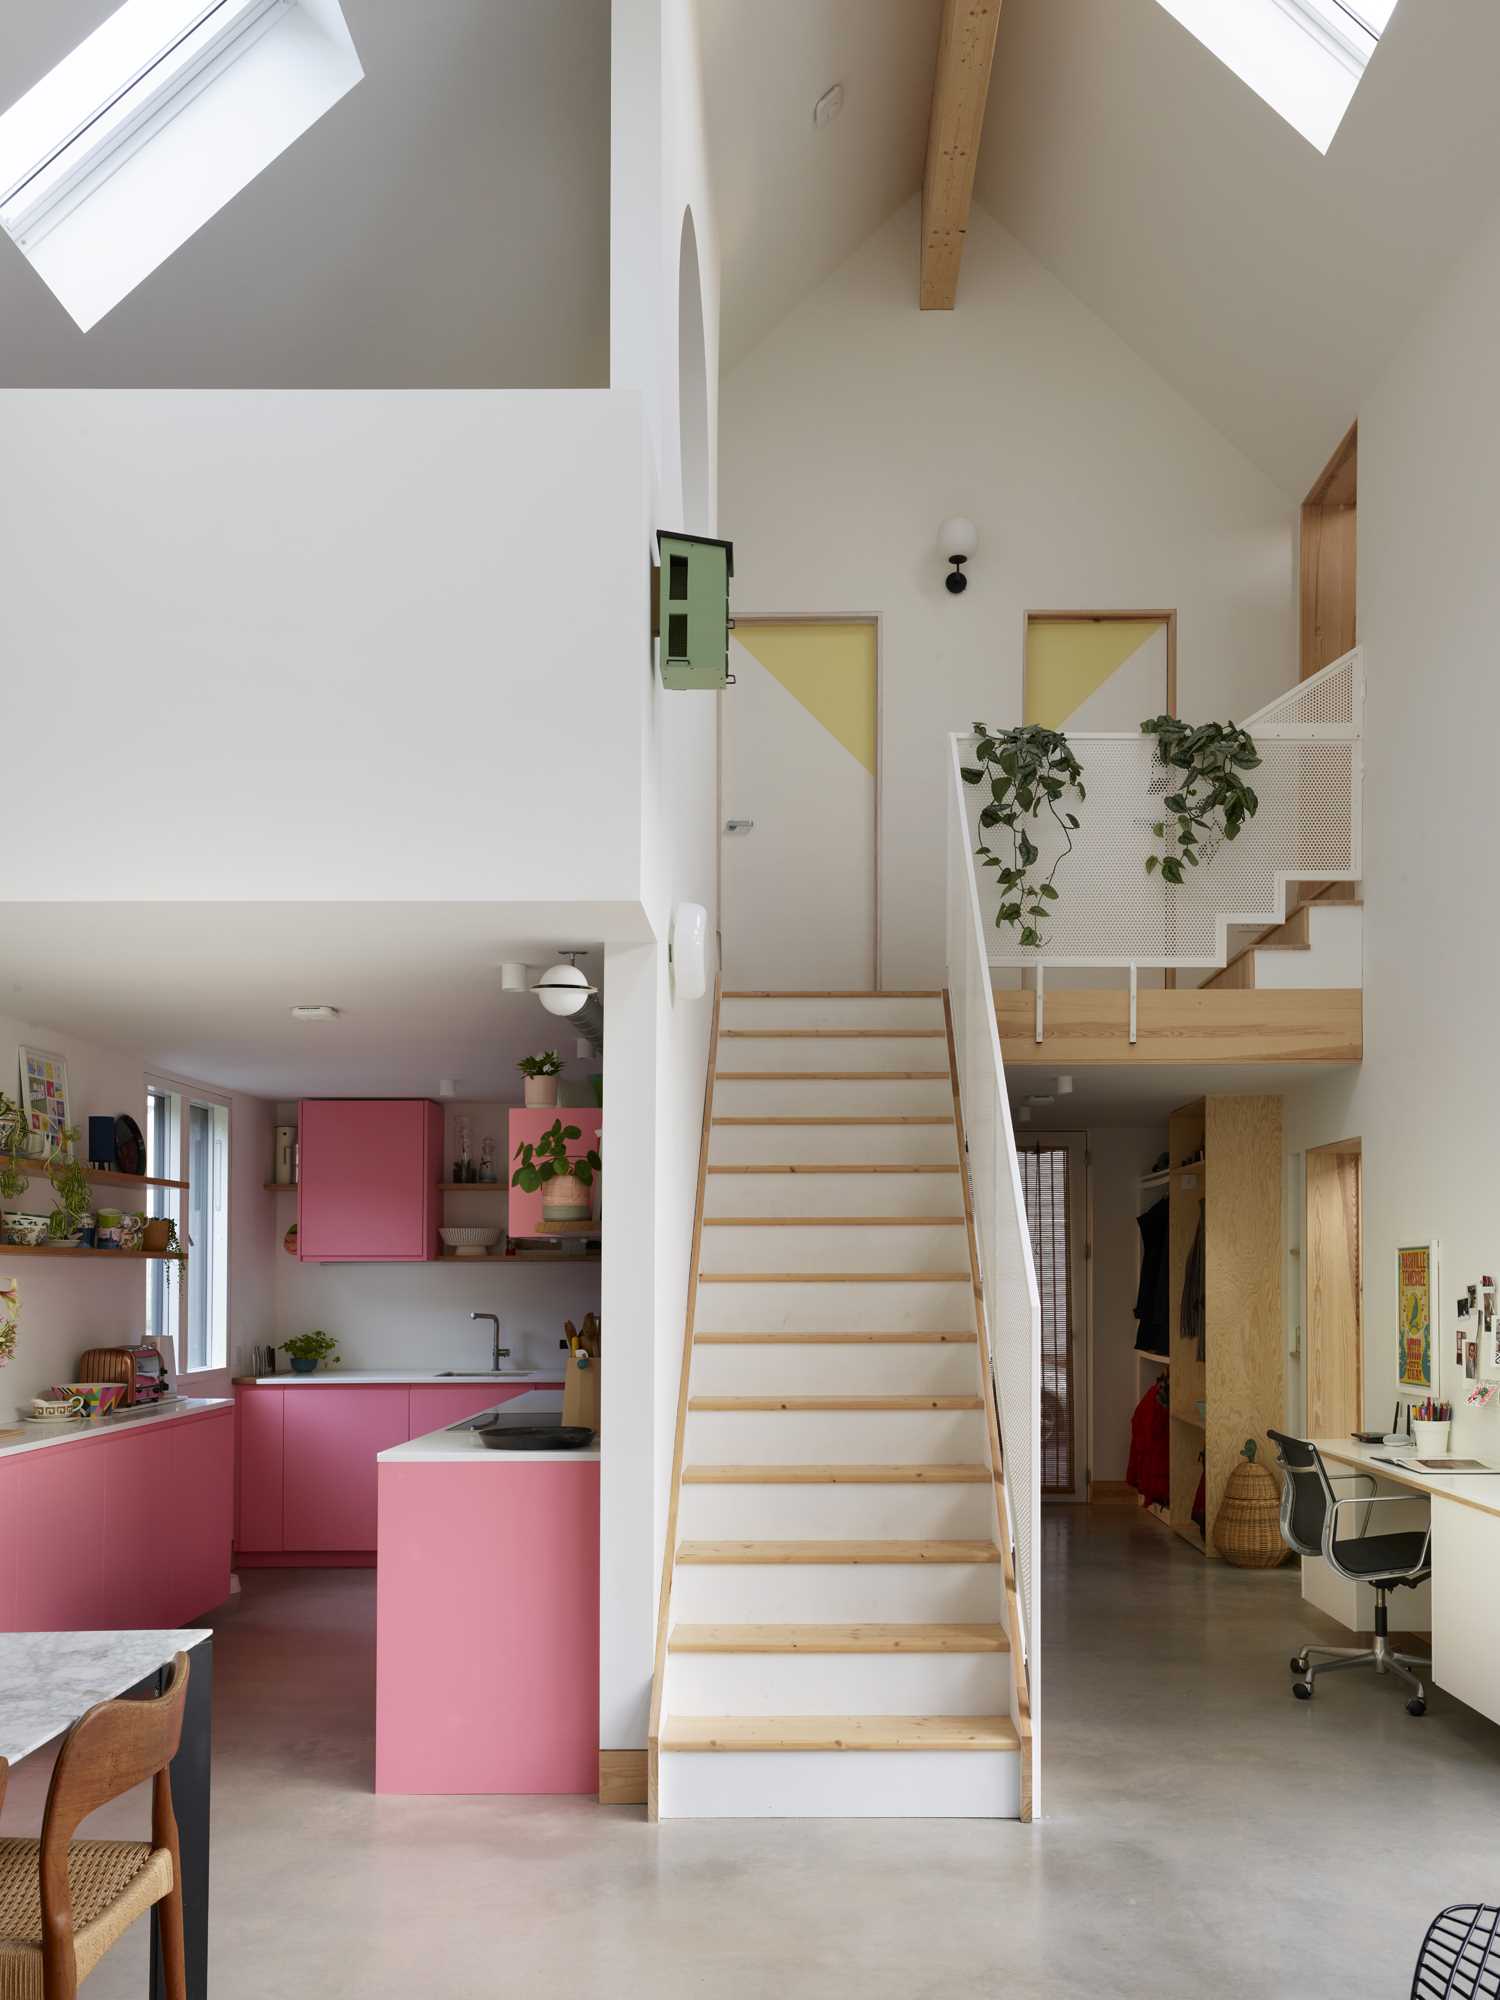 An unexpected design detail in this contemporary ،me is the kitchen with its pink cabinets, which are complemented by white countertops and floating wood shelves.